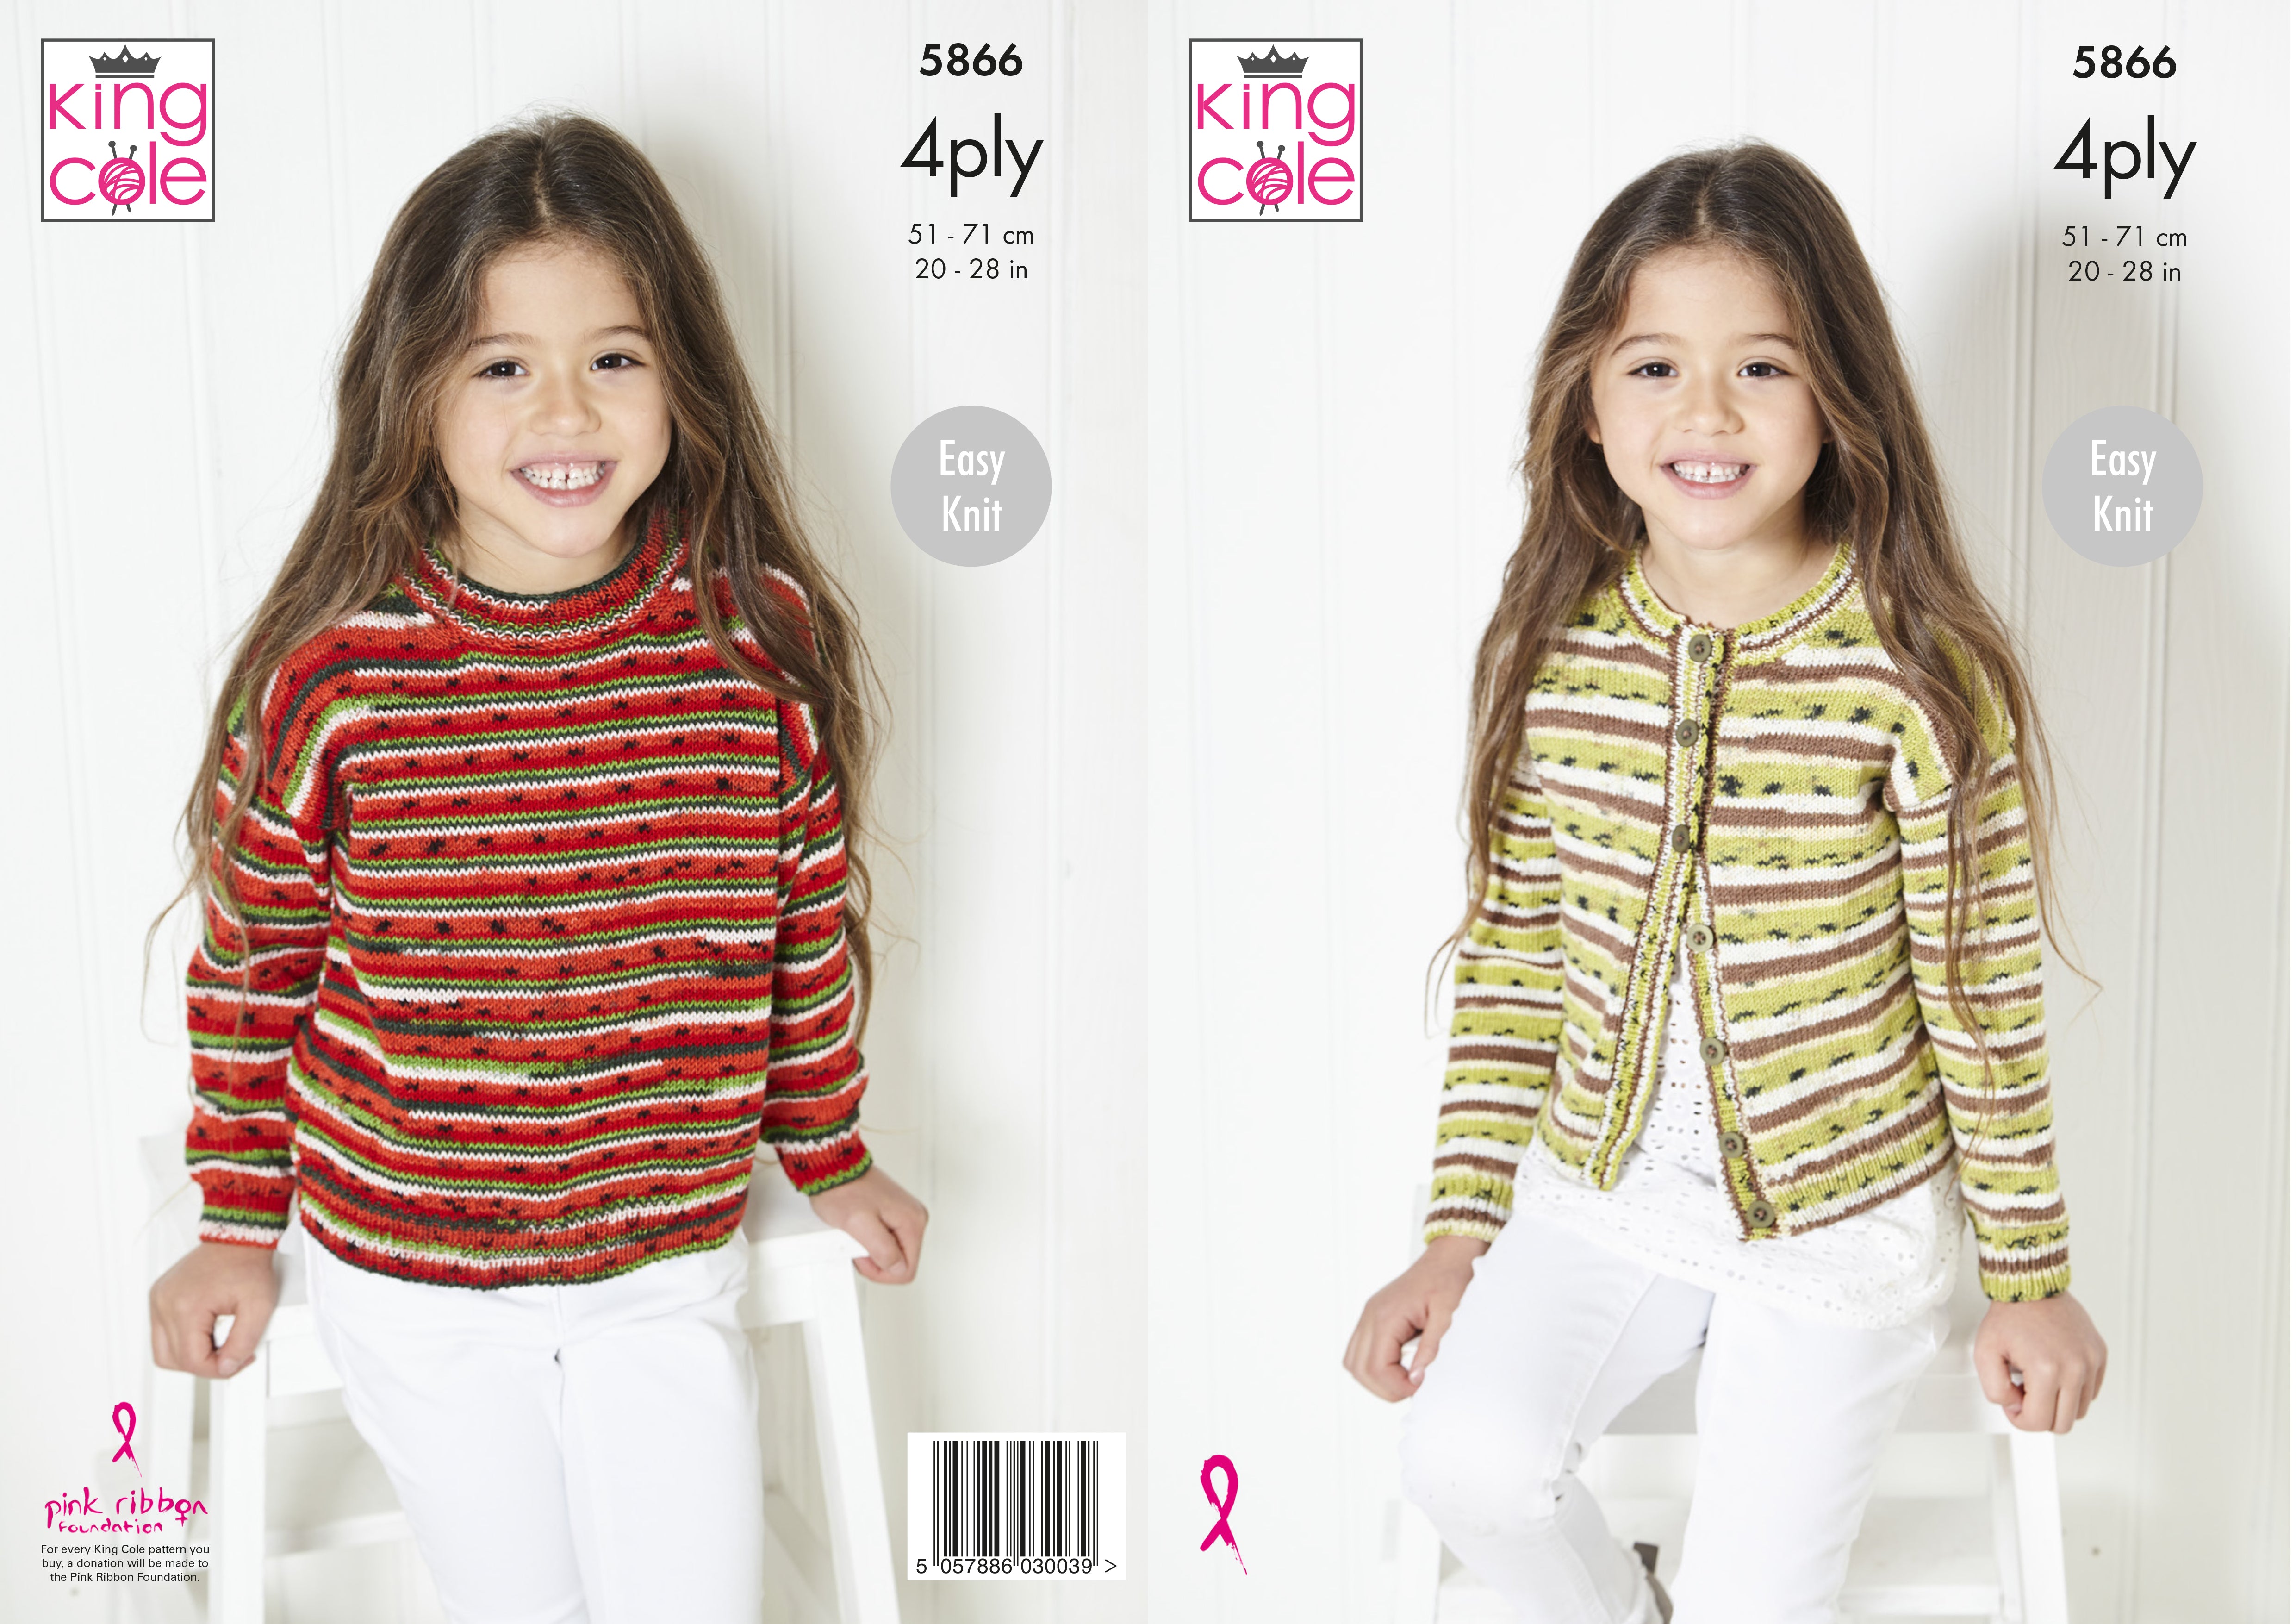 King Cole 5866 Childs Sweater and Cardigan Pattern